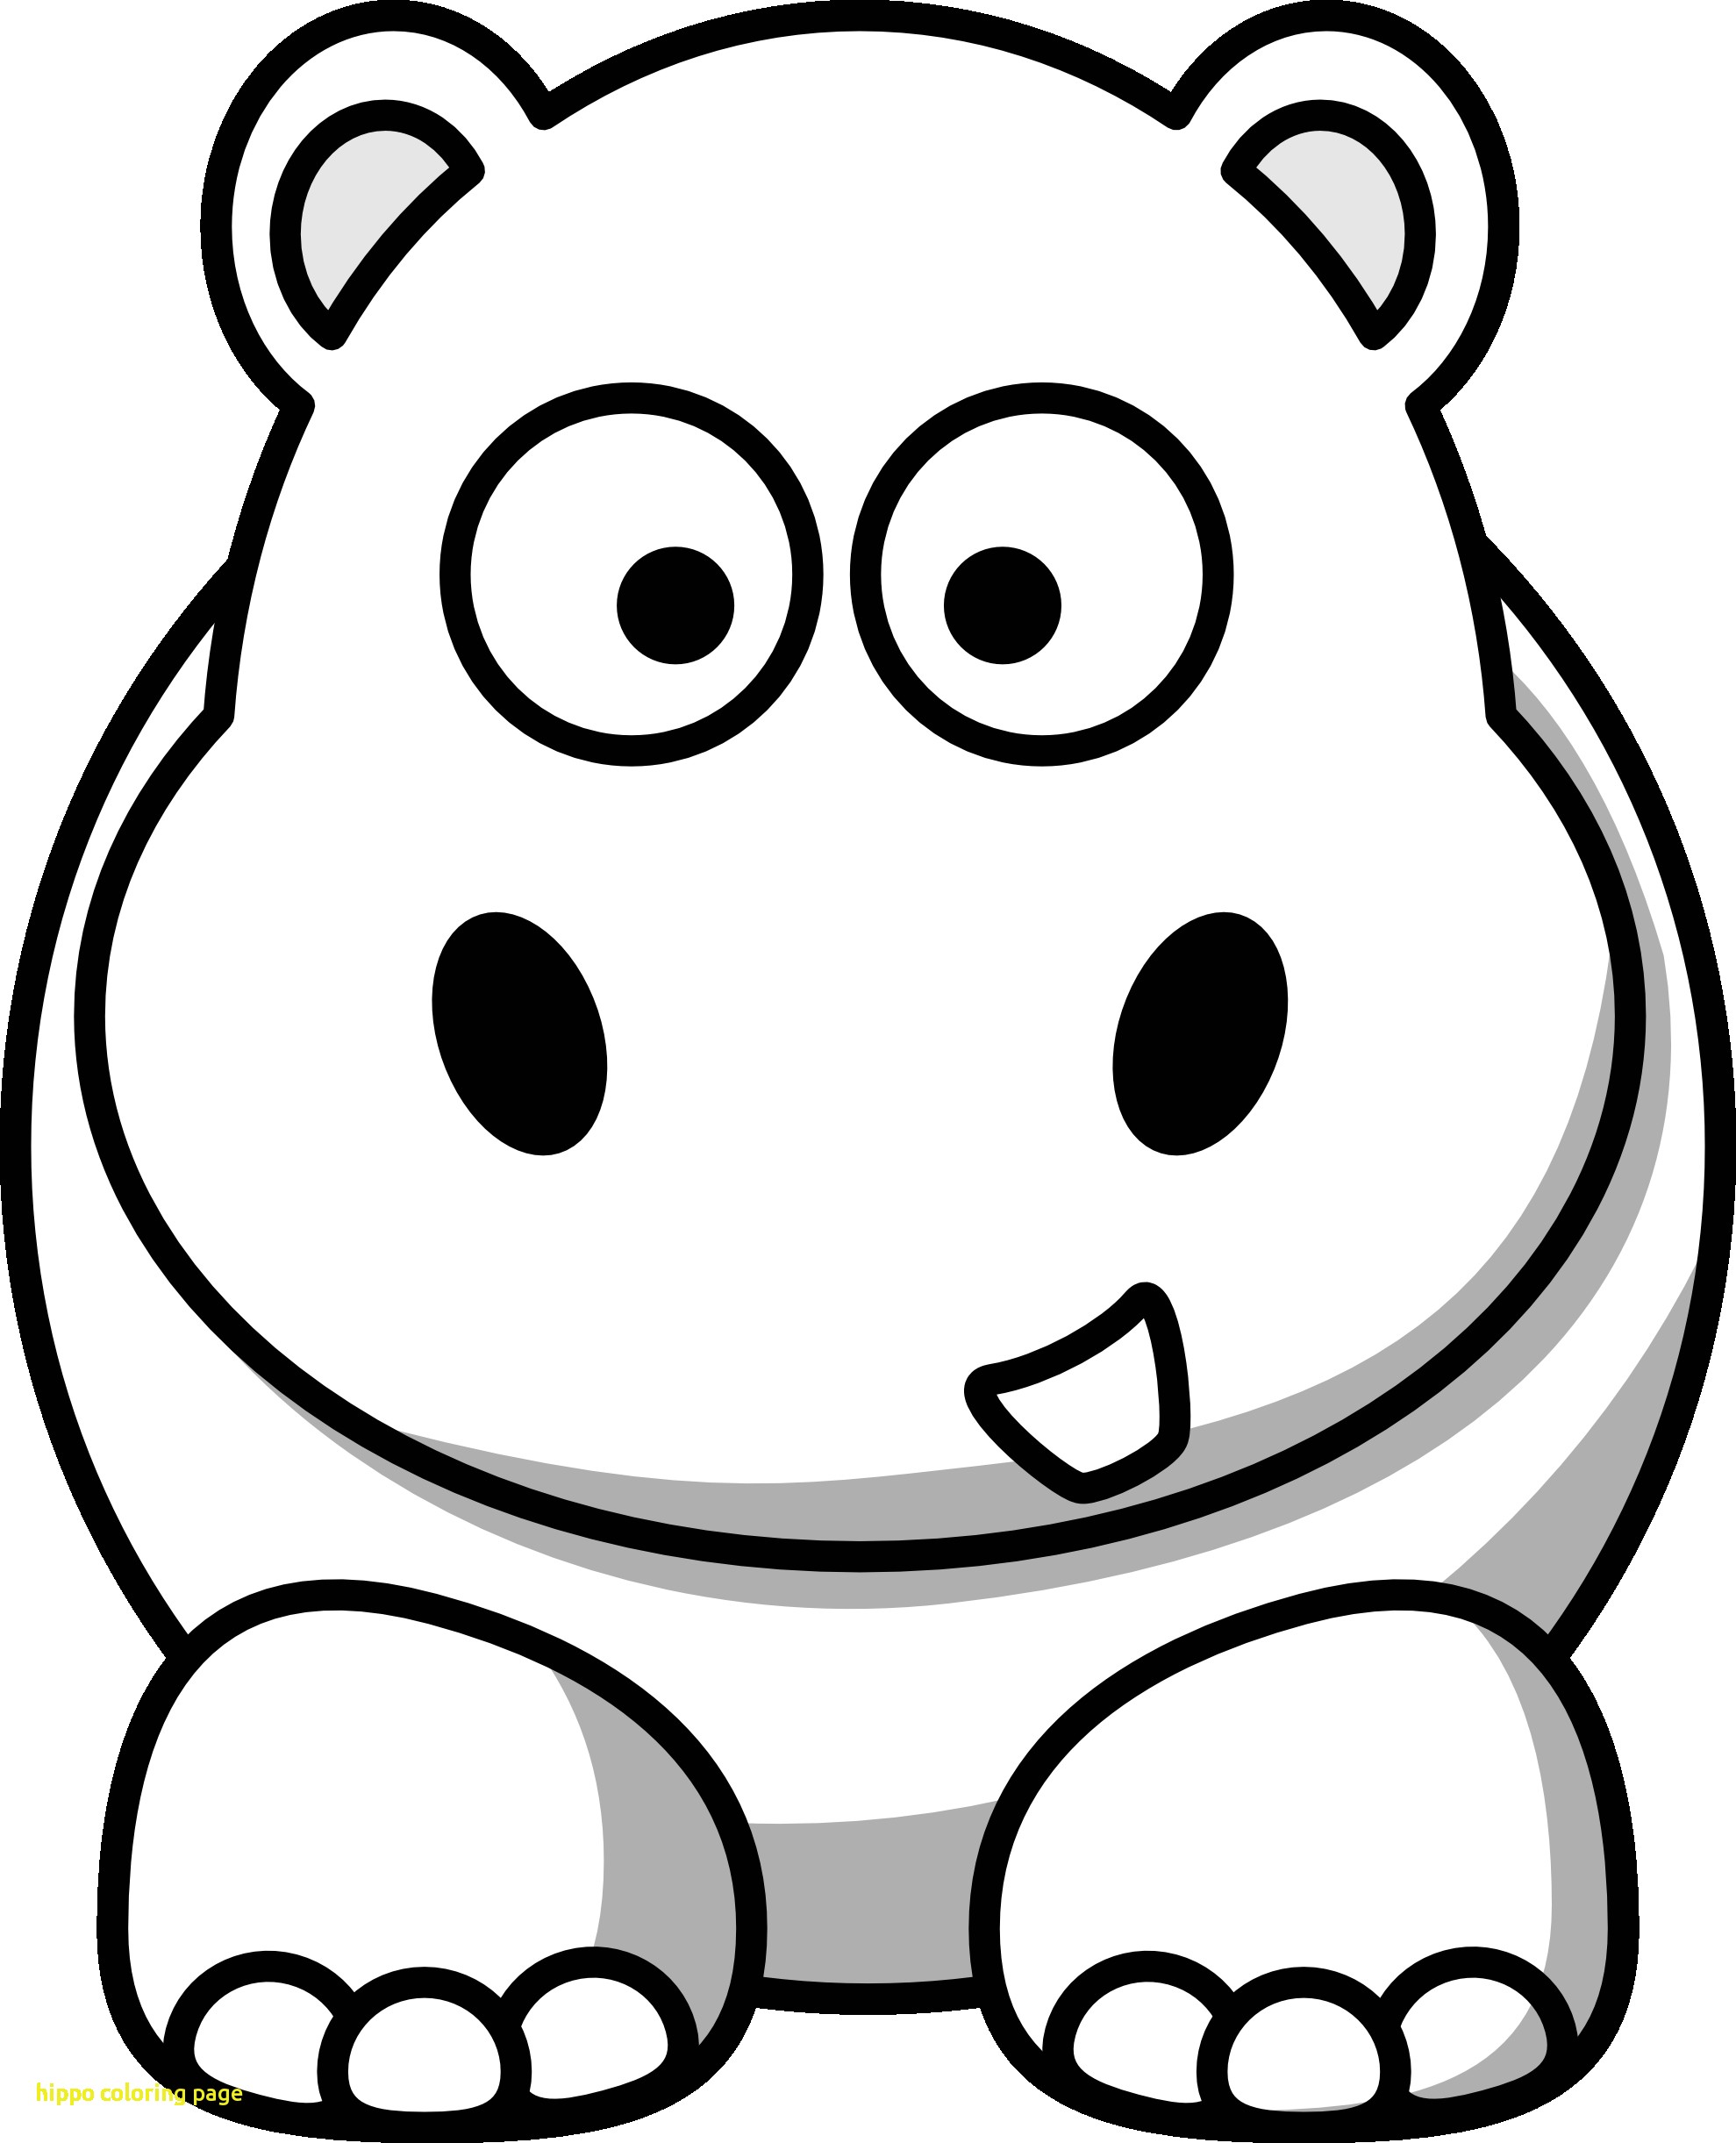 Printable Hippo Coloring Pages Pdf - Coloring Pages For Kids Hippo